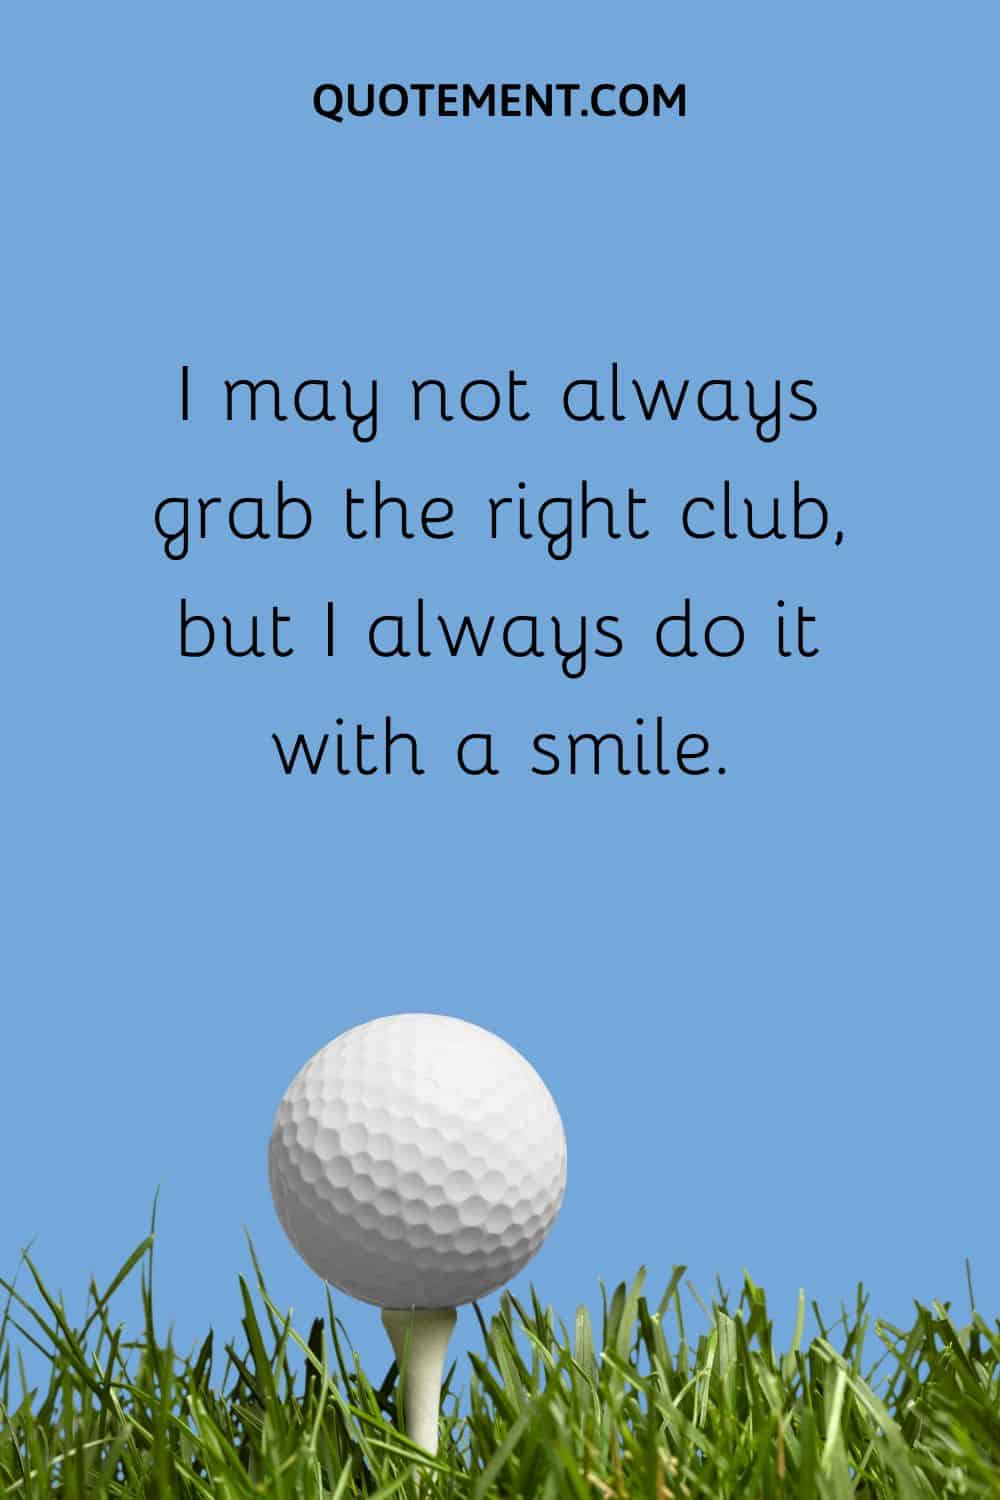 I may not always grab the right club, but I always do it with a smile.